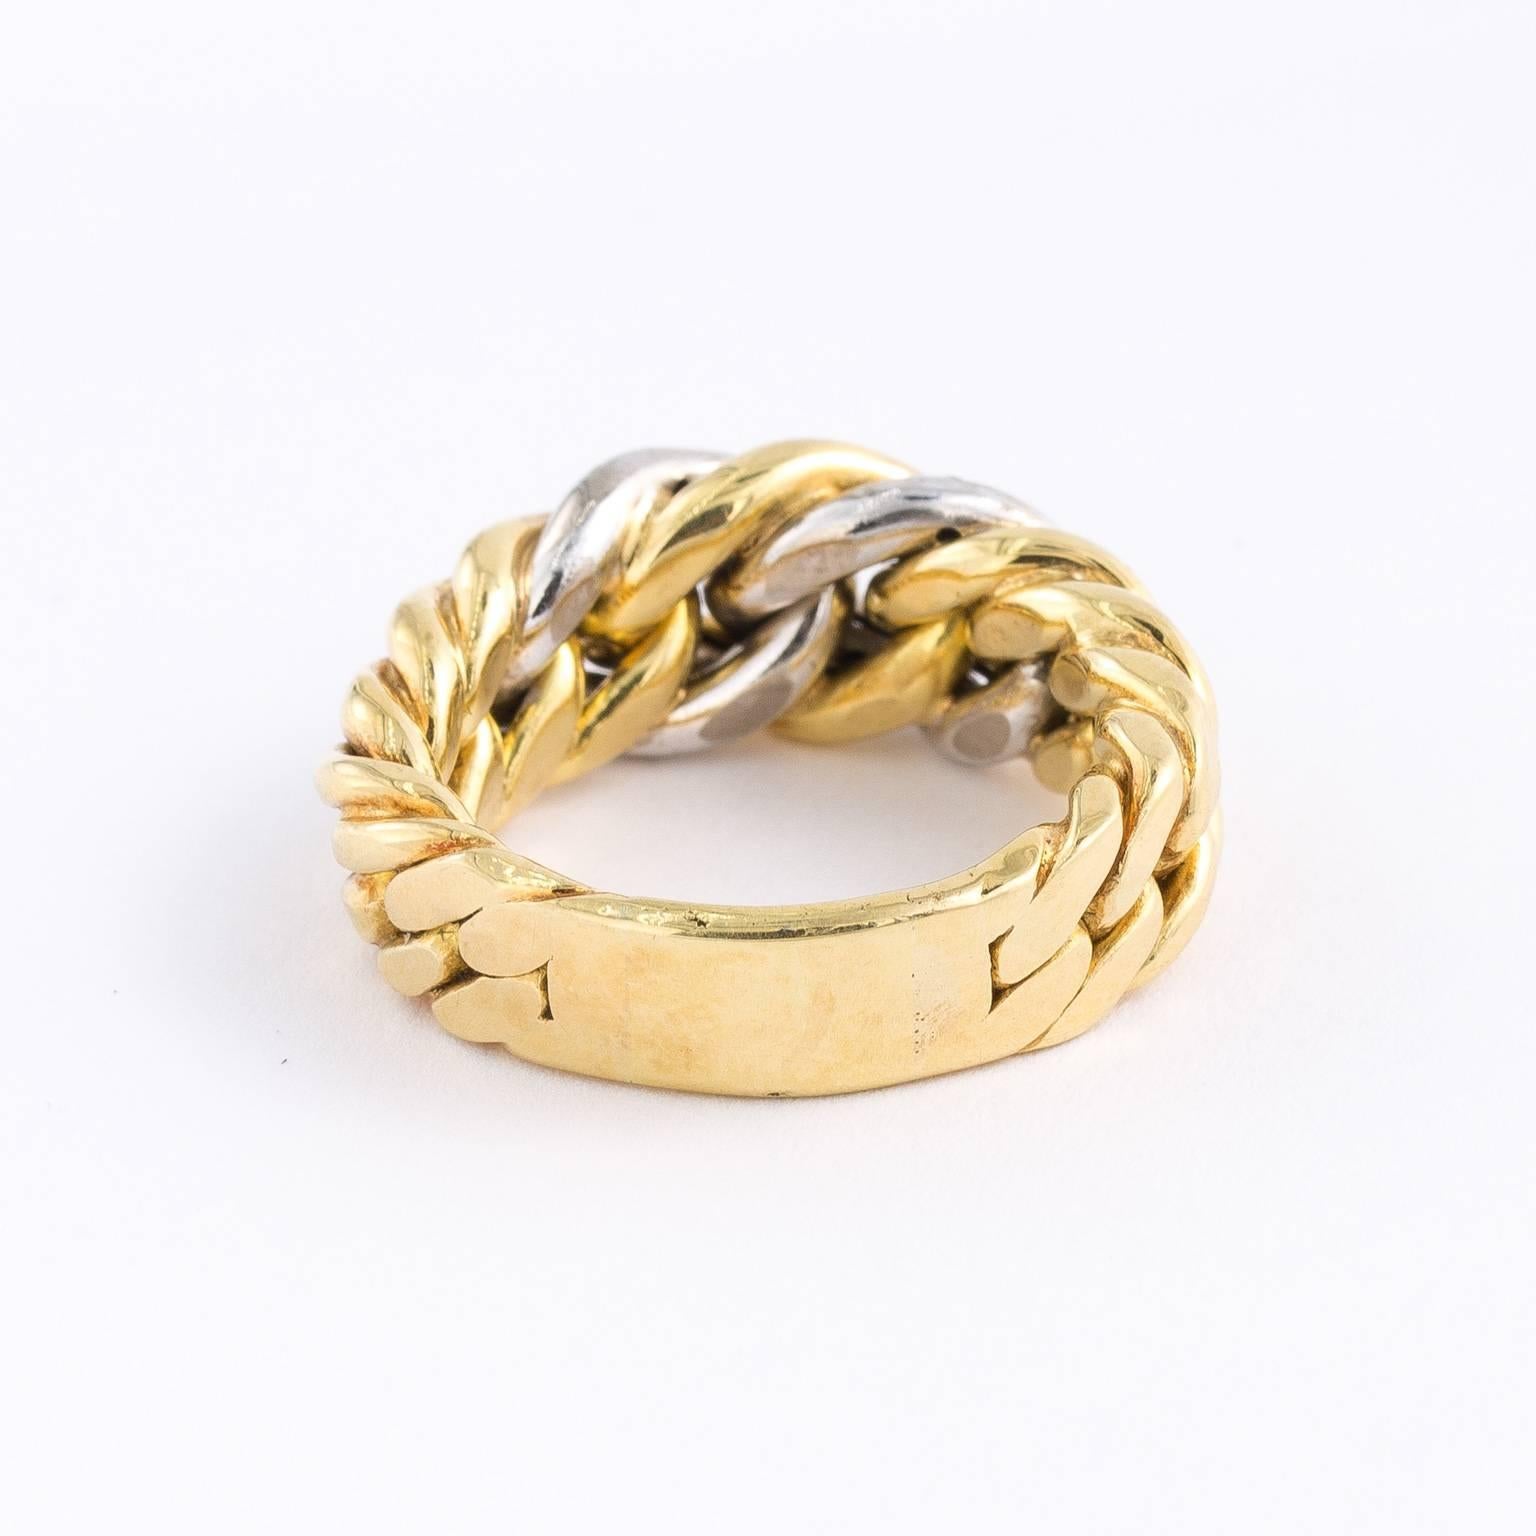 Women's or Men's Gold and Diamond Band Ring